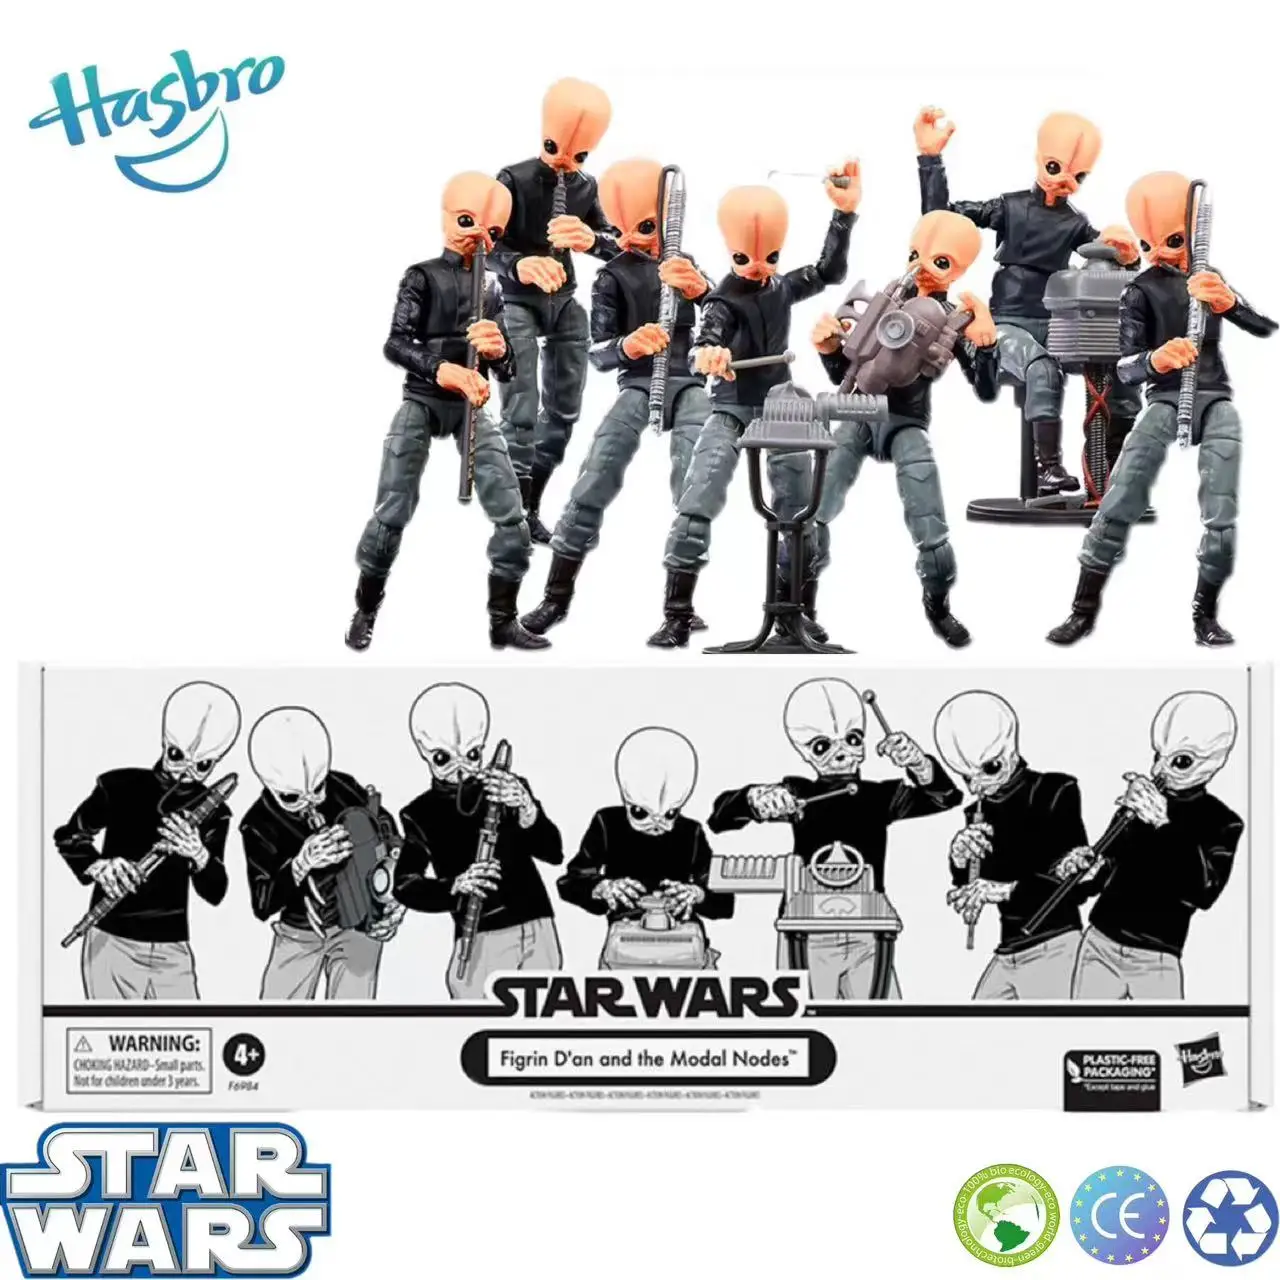 

Hasbro Original Star Wars The Vintage Collection The Modal Nodes 3.75 Inch Action Figure Collectible Model Toy Gift